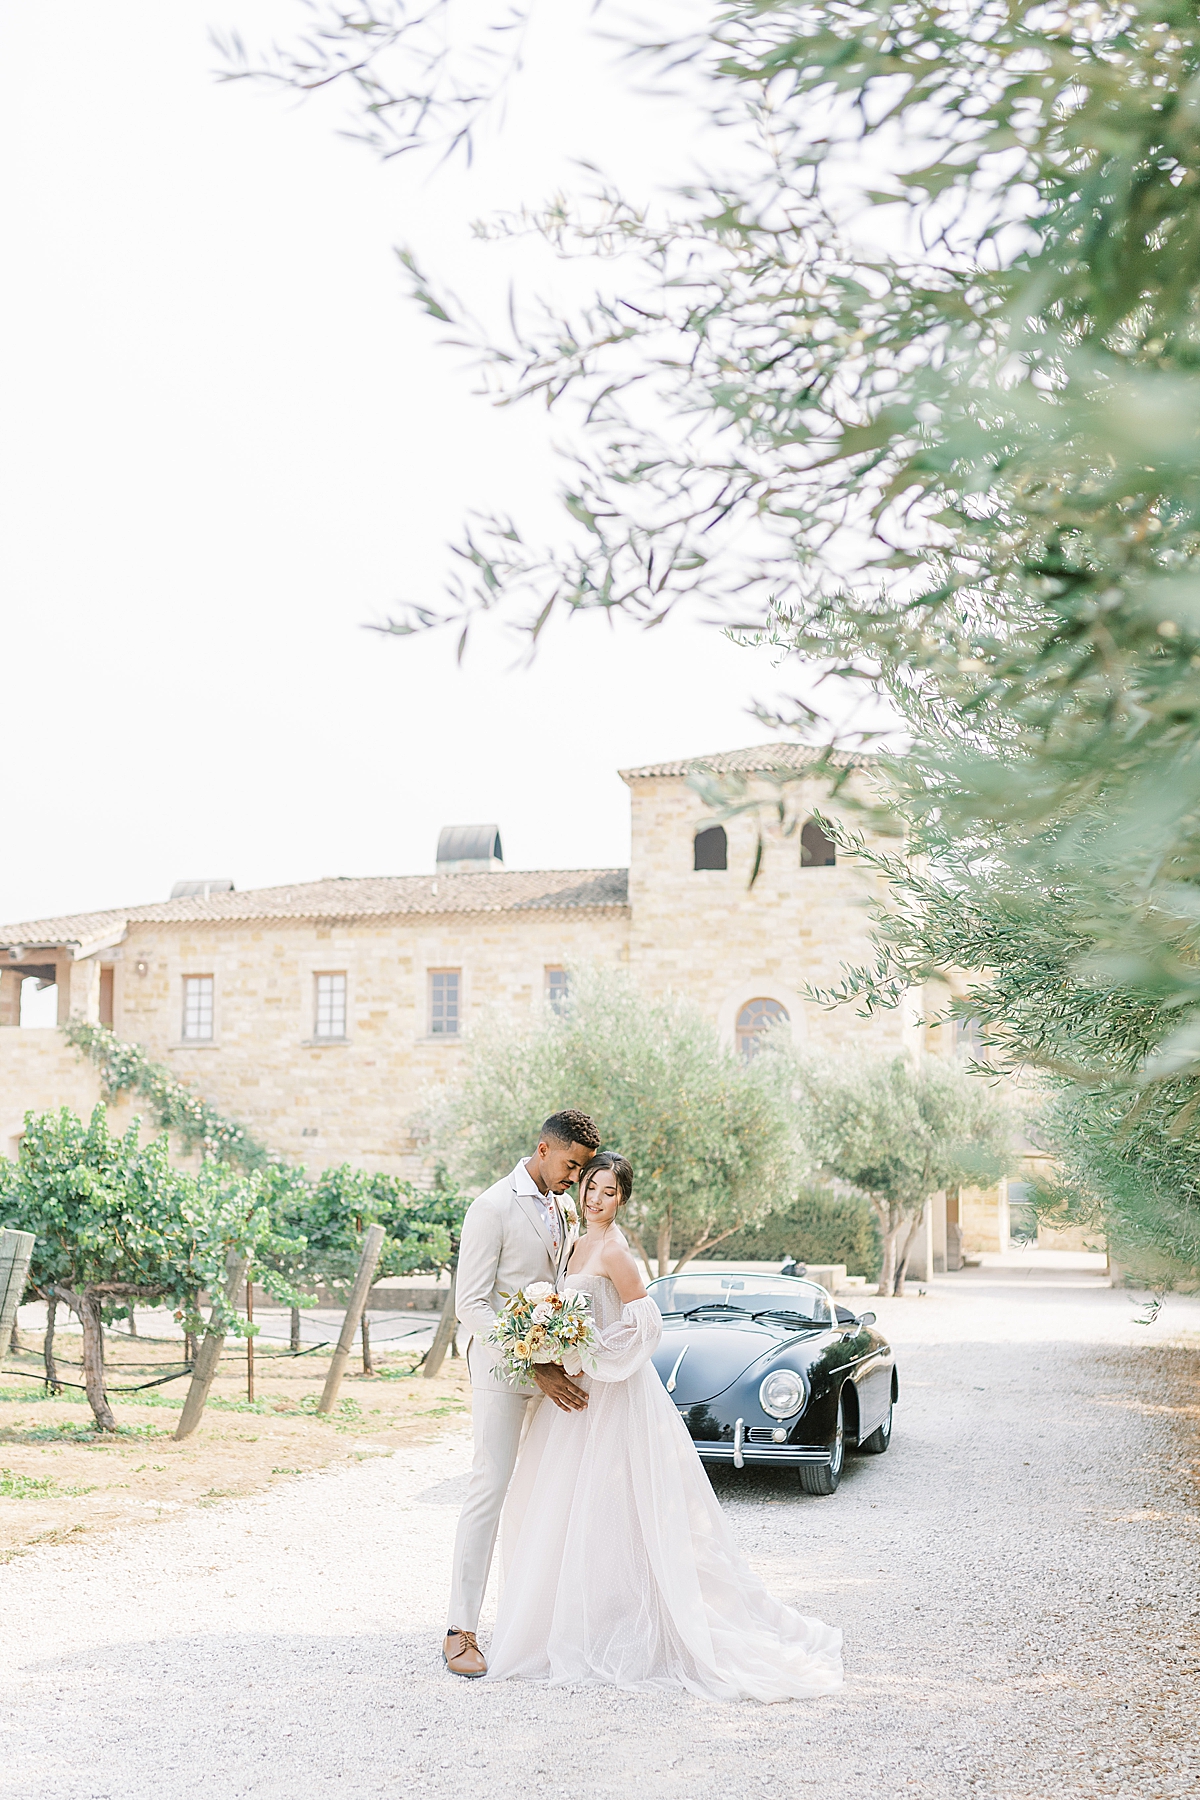 Luke leaning into his bride as she looks away from him near rows of vineyards and olive trees at this Sunstone Villa Wedding editorial.